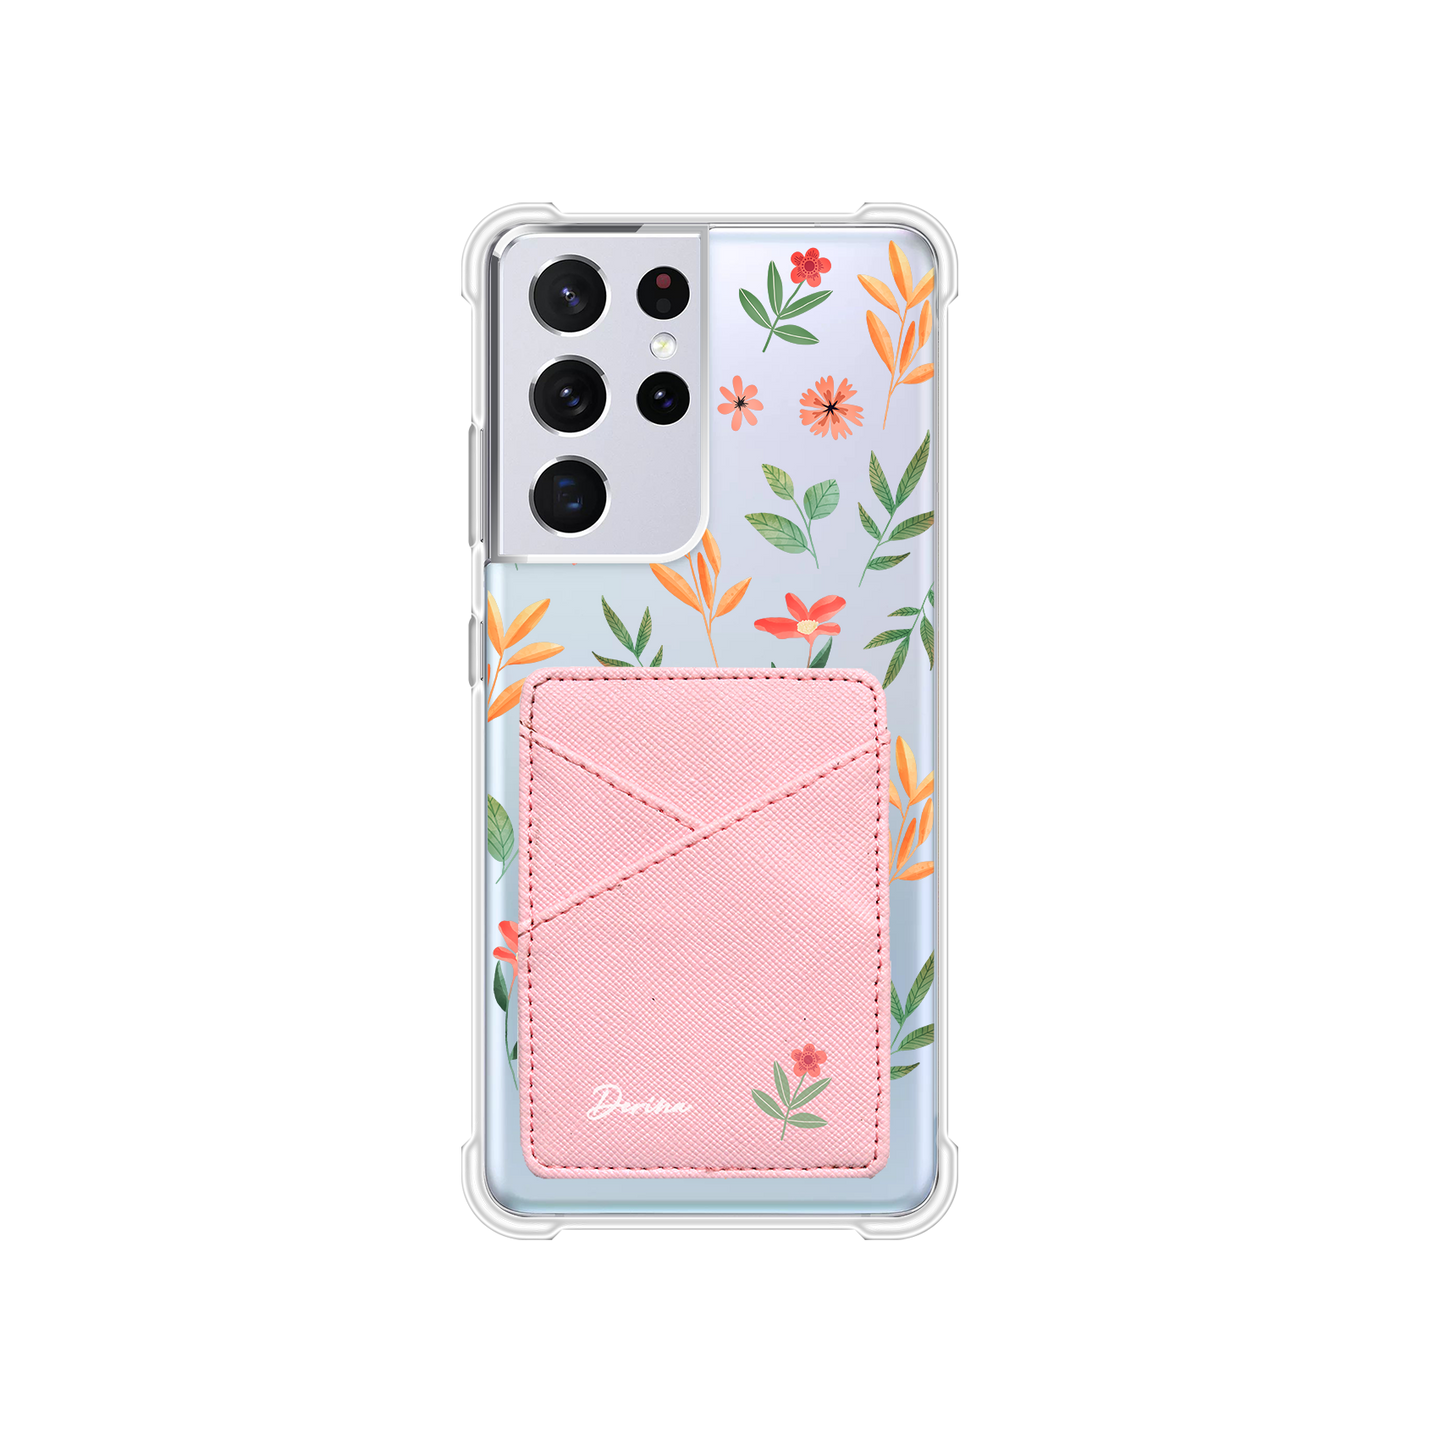 Android Phone Wallet Case - Birth Flowers 3.0